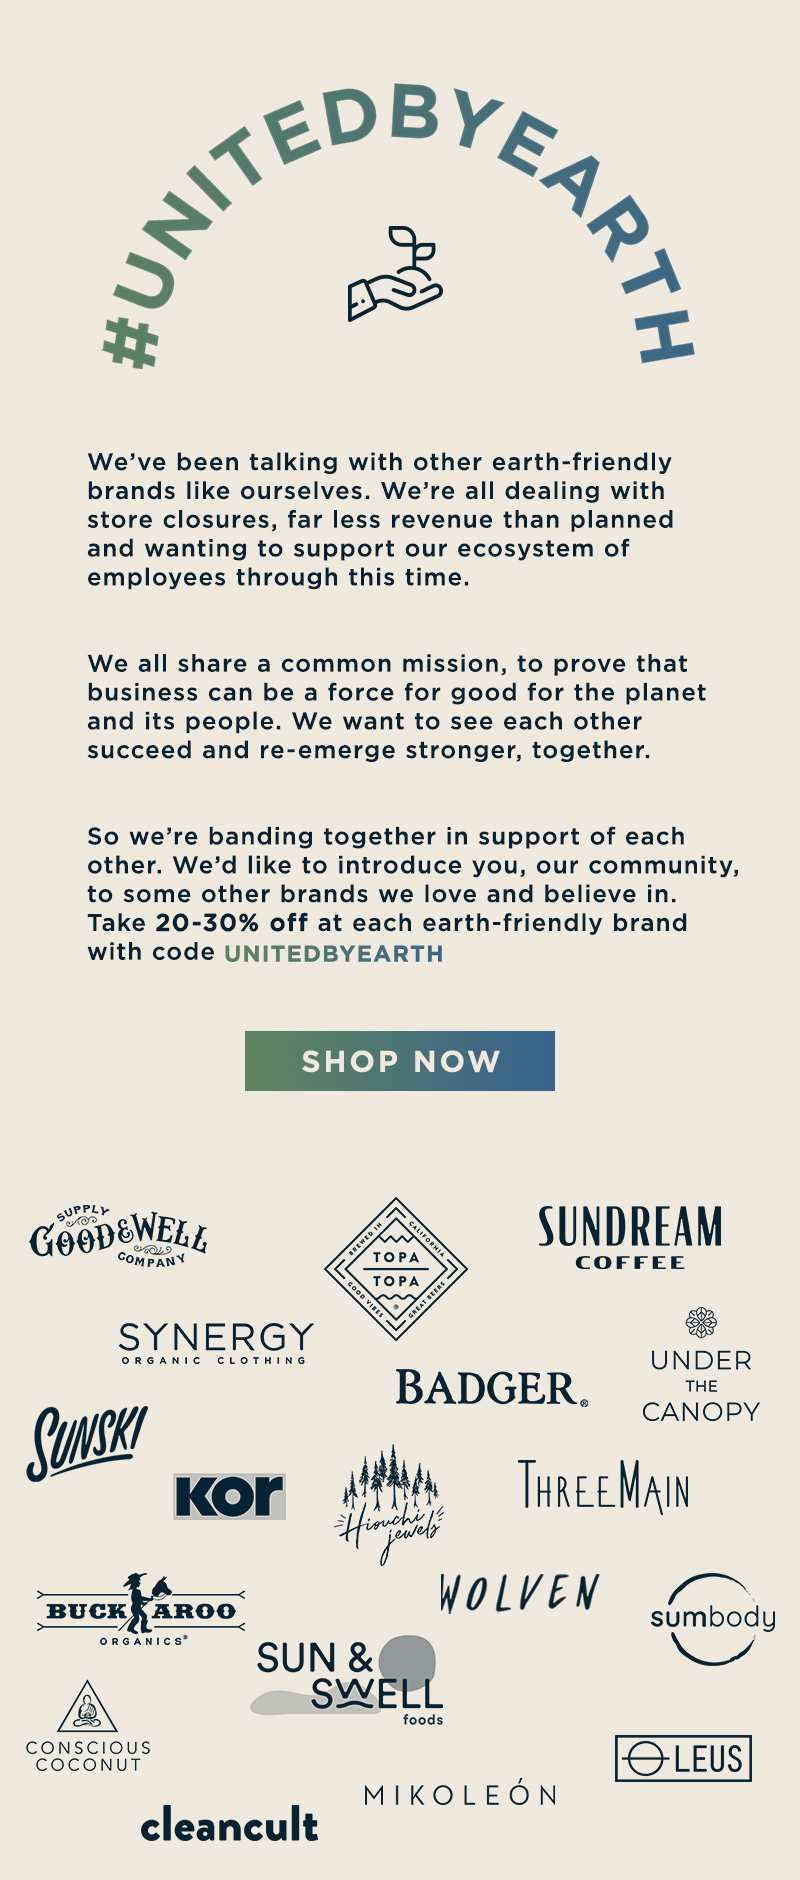 We''ve been talking with other earth-friendly brands like ourselves. We''re all dealing with store closures, far less revenue than planned and wanting to support our ecosystem of employess through this time. So we''re banding together in support of each other. We''d like to introduce you, our community, to some other brands we love and believe in. Take 20-30% off at each earth-friendly brand with code unitedbyearth.